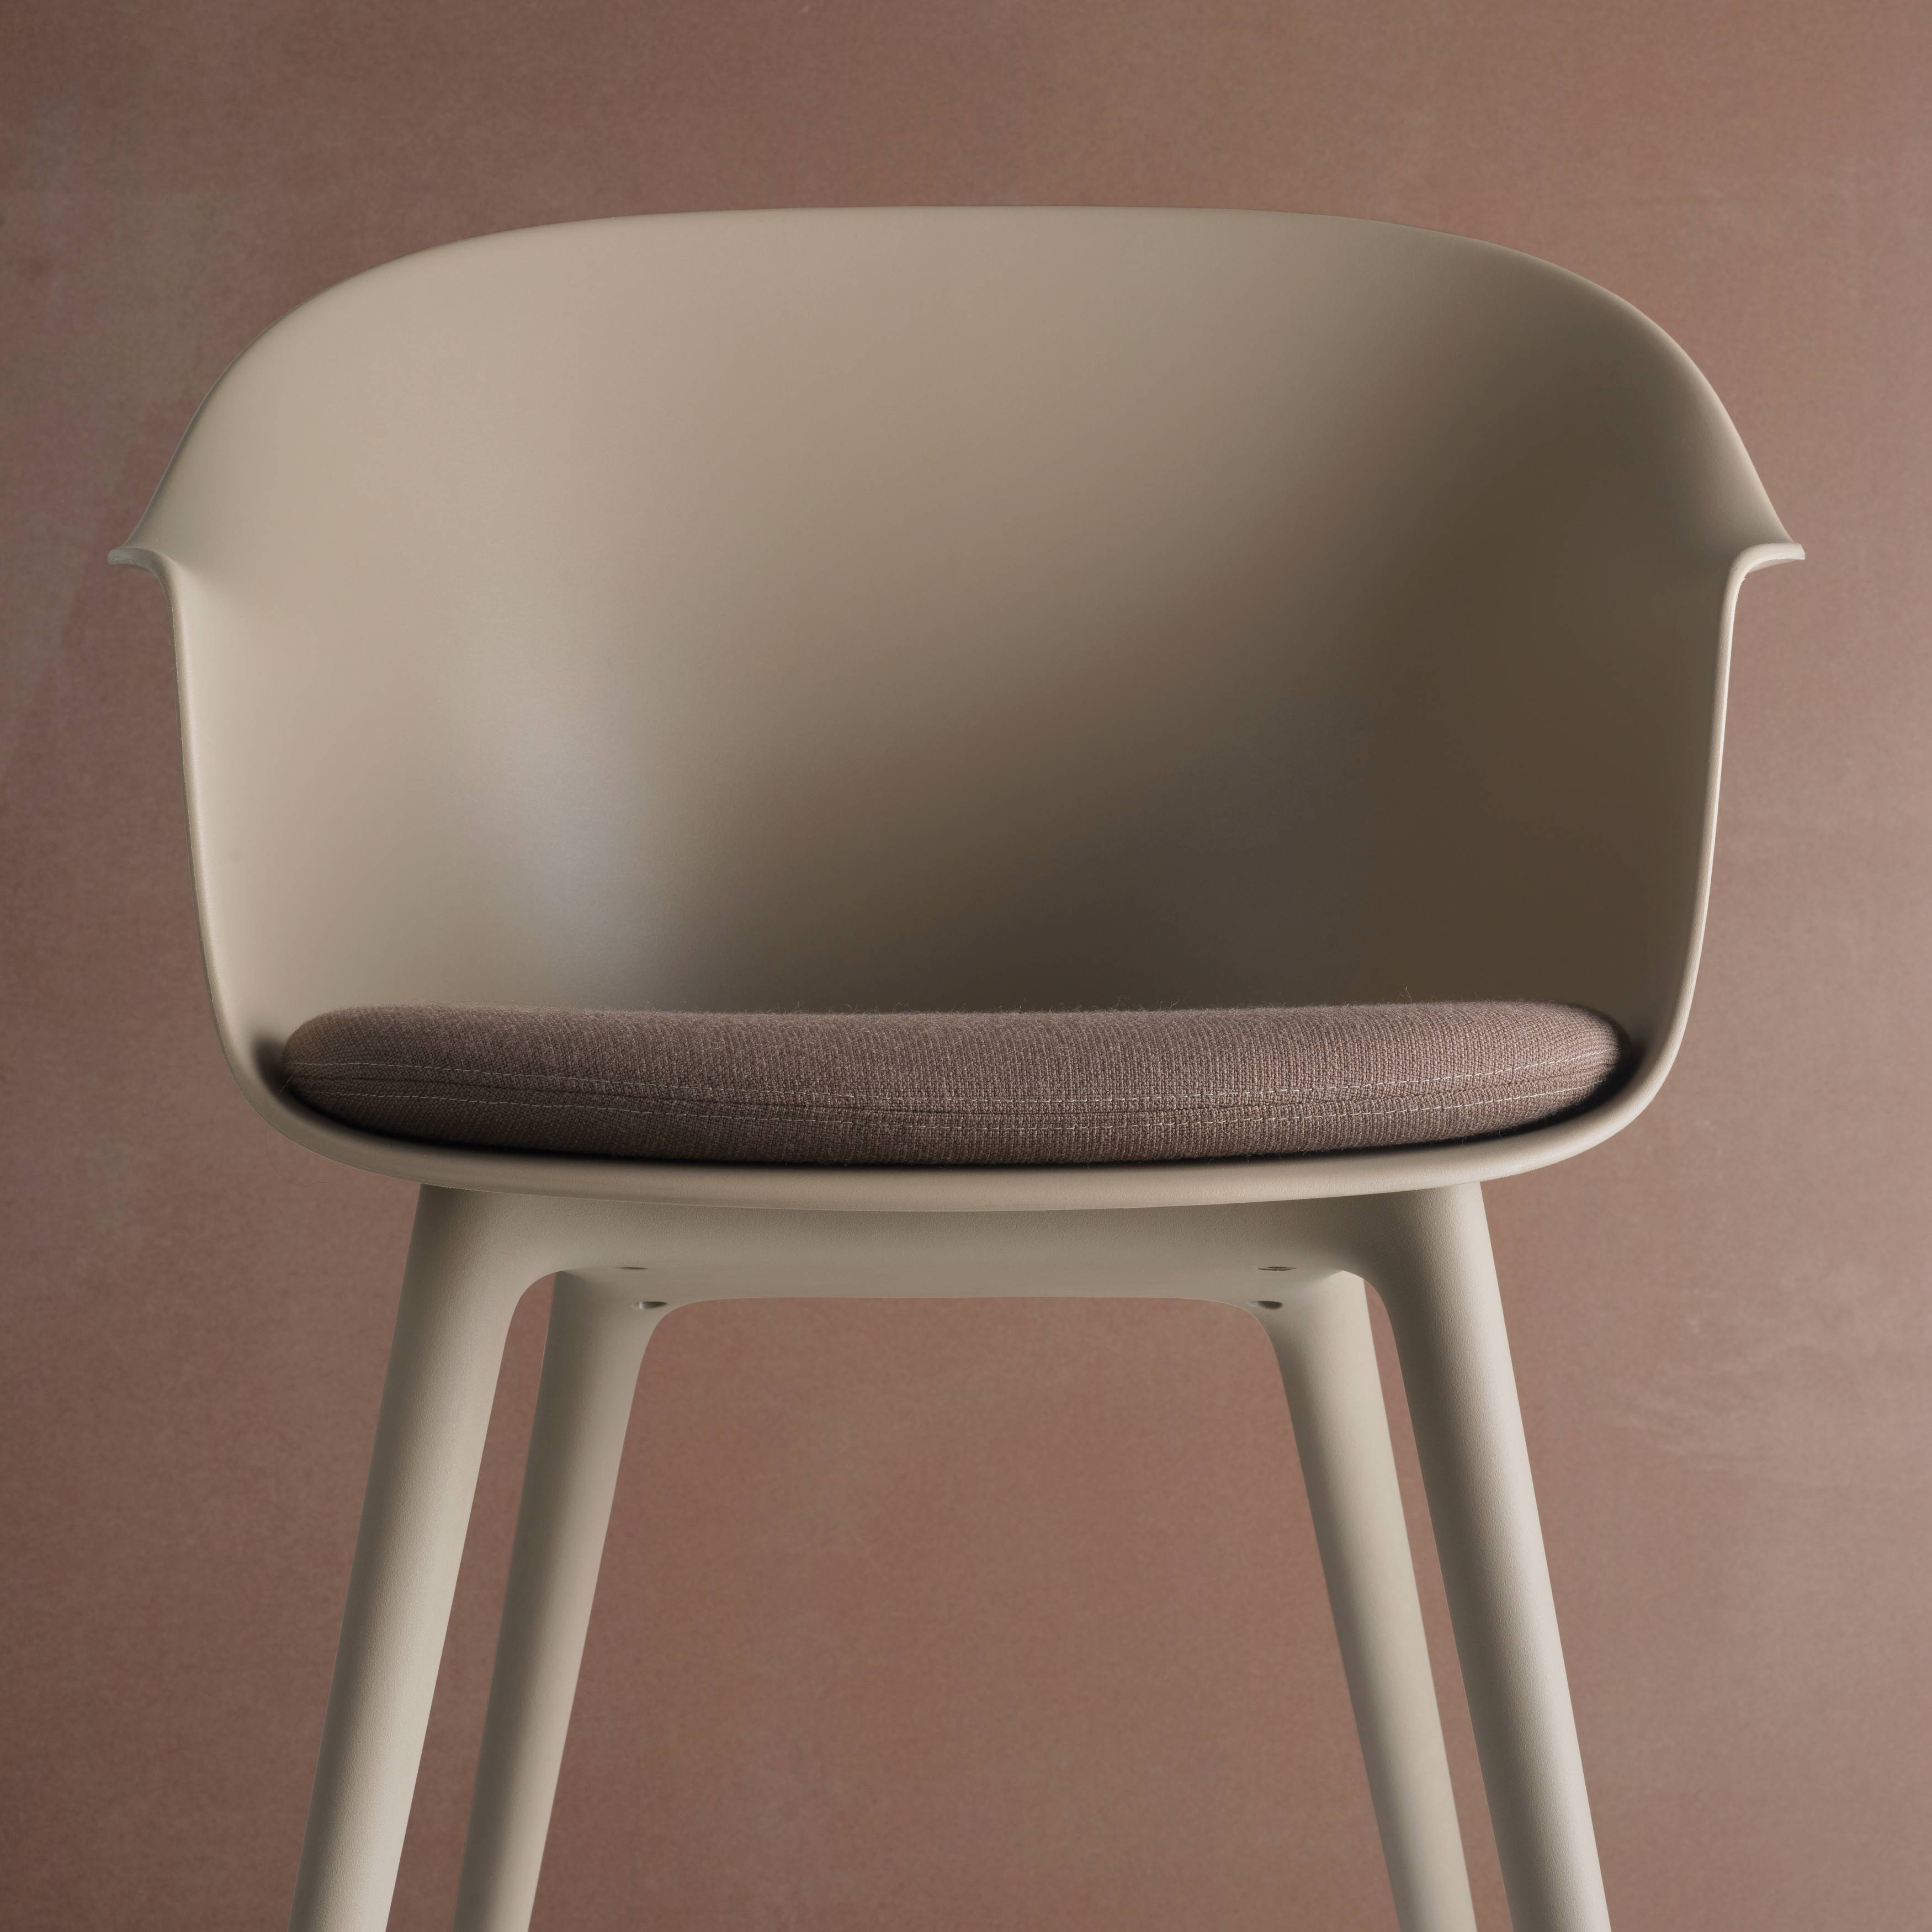 Bat Dining Chair: Plastic Base with Cushion